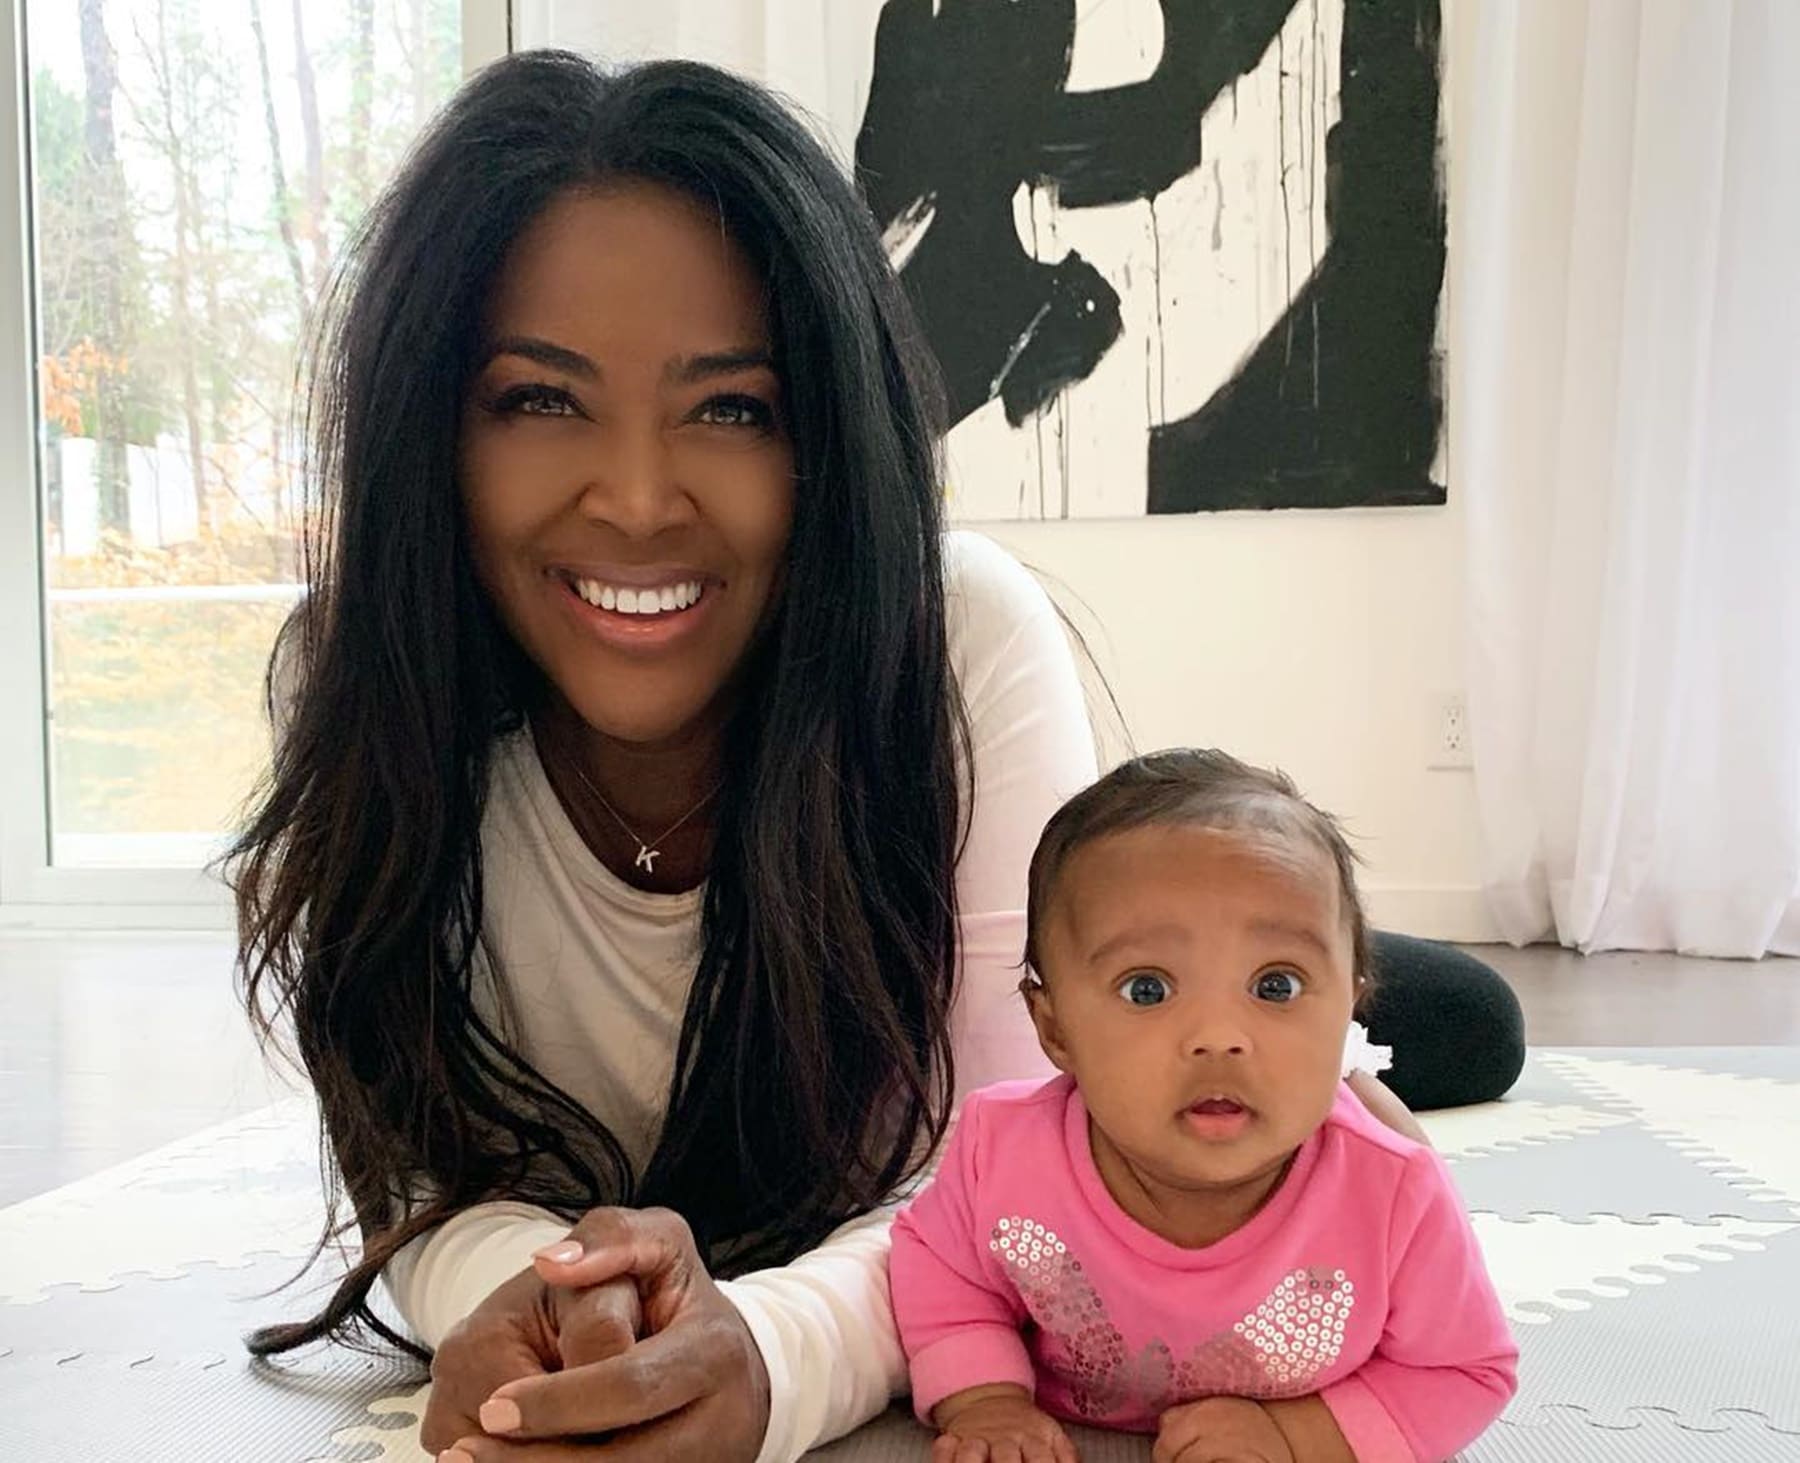 ”kenya-moore-gets-mom-shamed-and-kicked-out-of-restaurant-with-baby-brooklyn-rhoa-star-shares-embarrassing-incident”